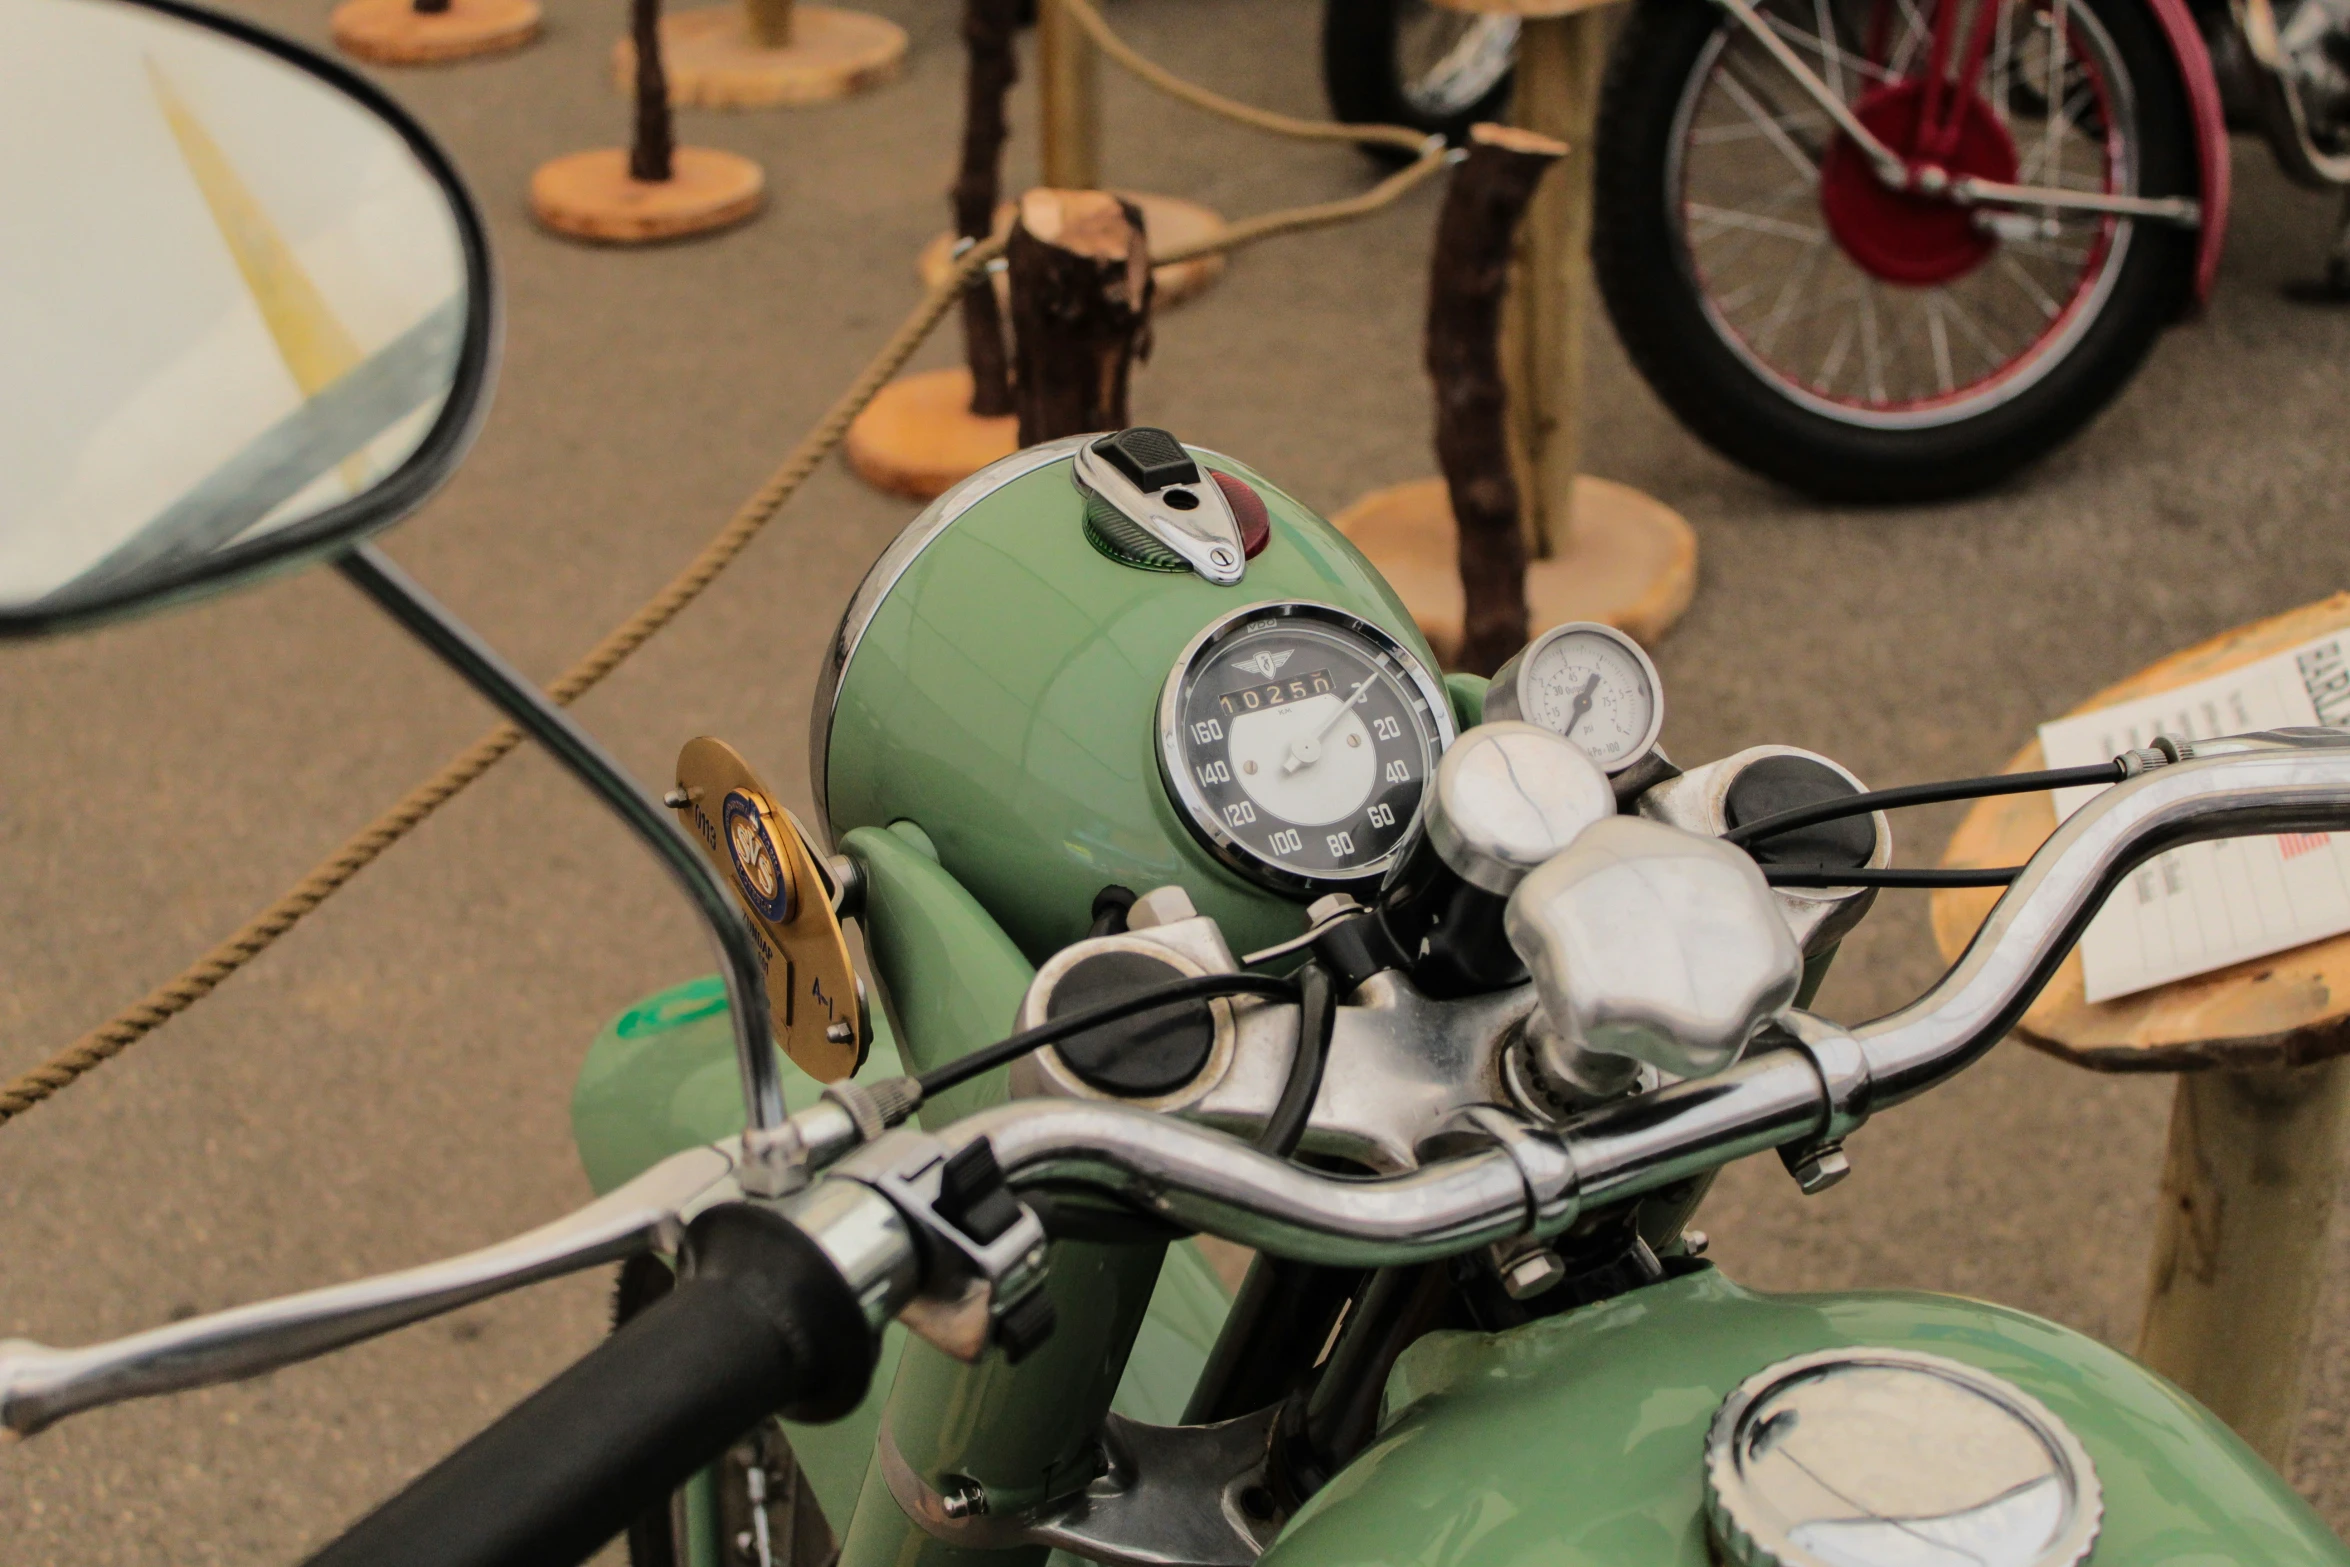 the handlebars of a motorcycle are neatly placed